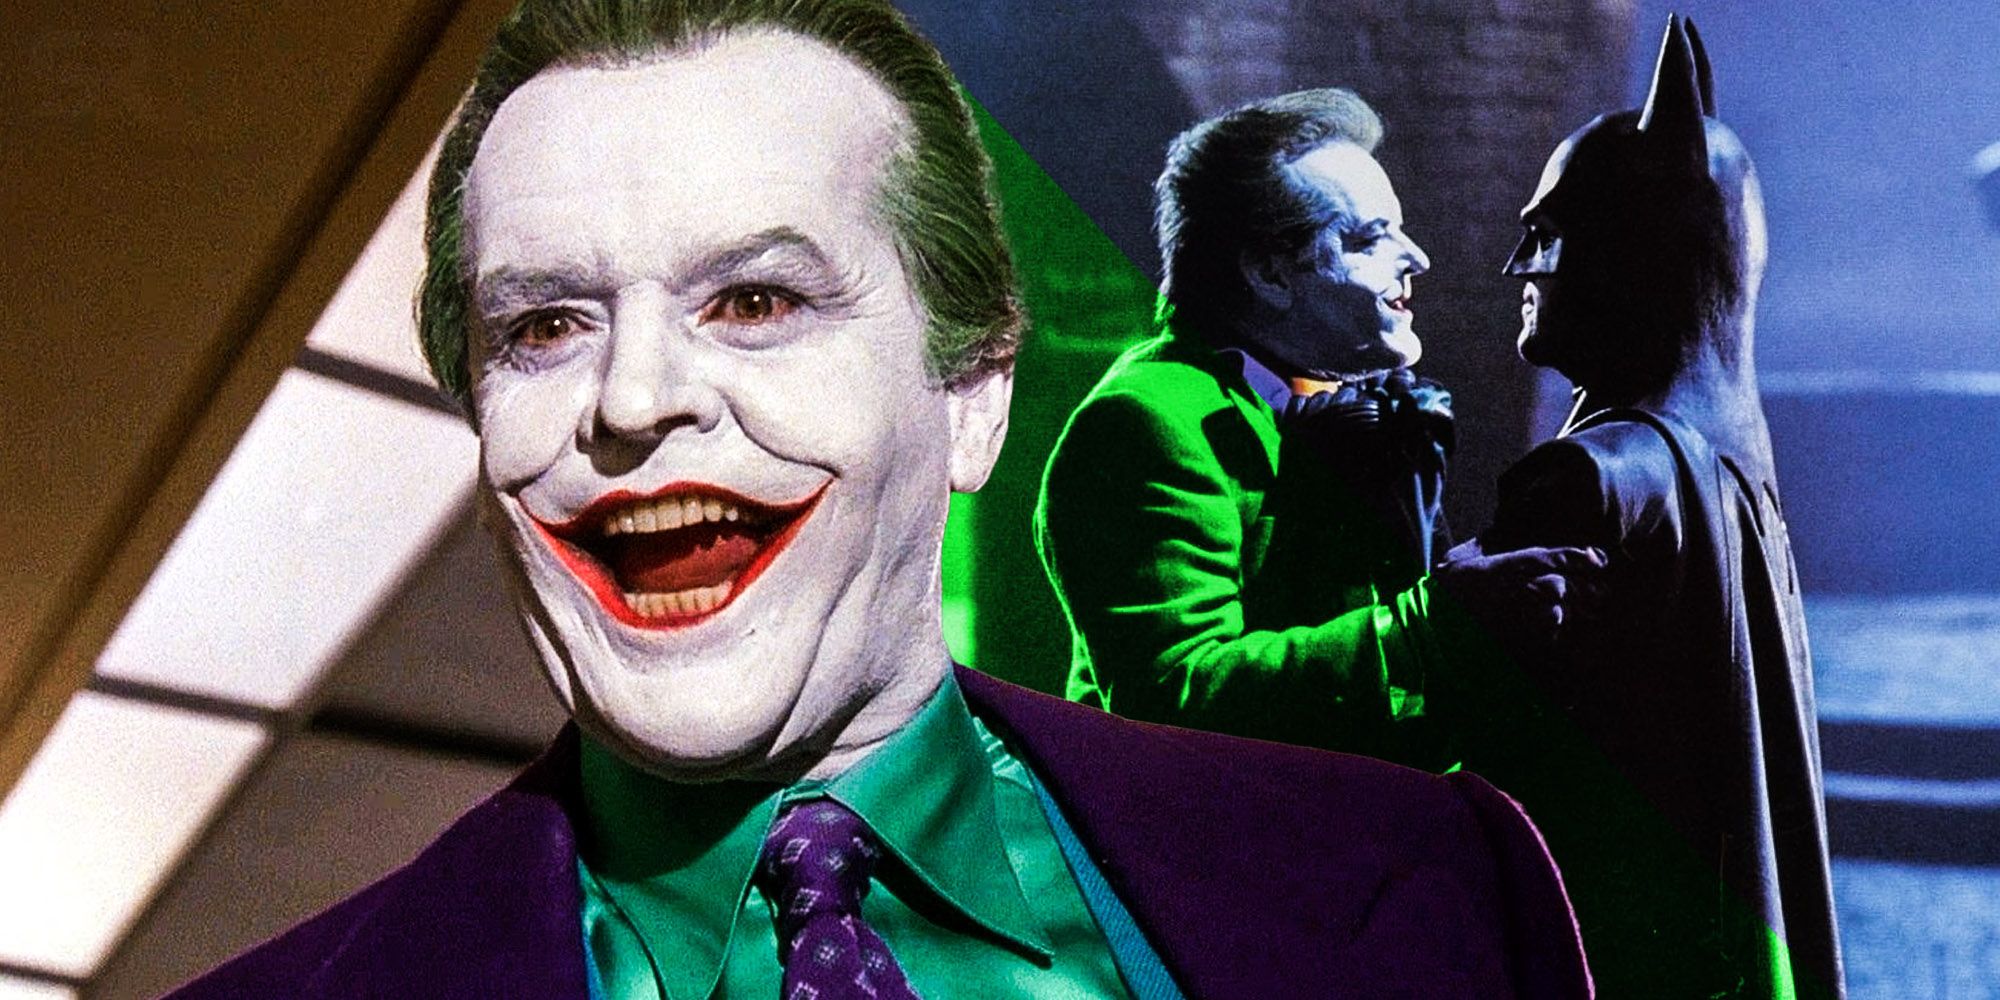 The Joker’s Laughing Bag From Batman 1989 & The Flash Explained